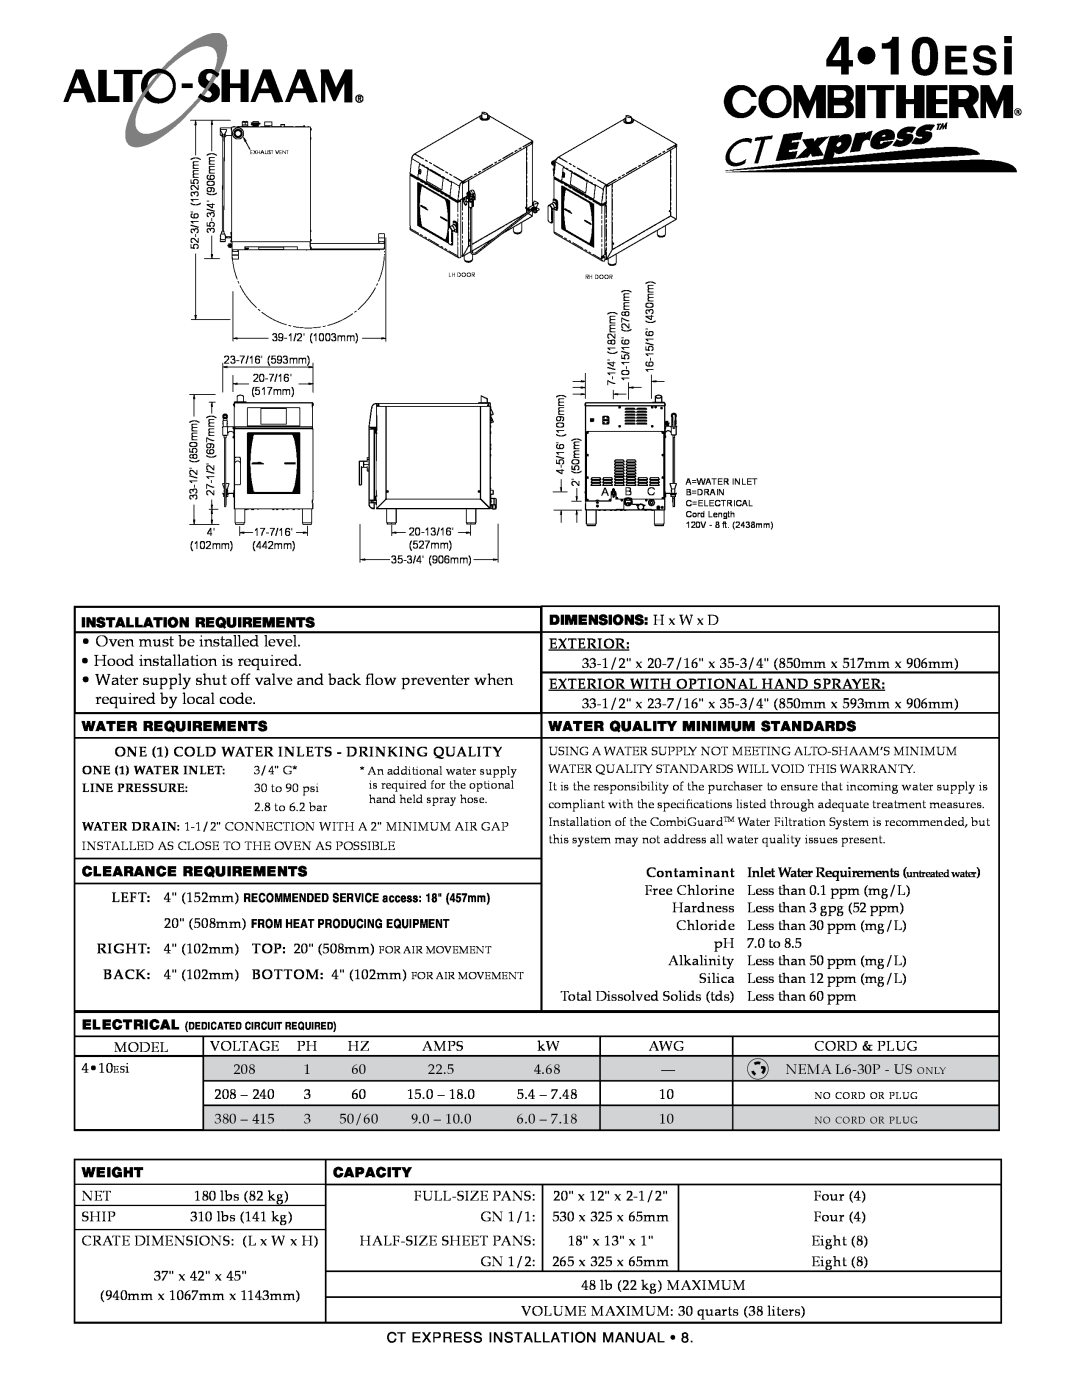 Alto-Shaam 4.10ESiVH 410esi, Installation requirements, dimensions h x w x d, Exterior, water requirements, Contaminant 